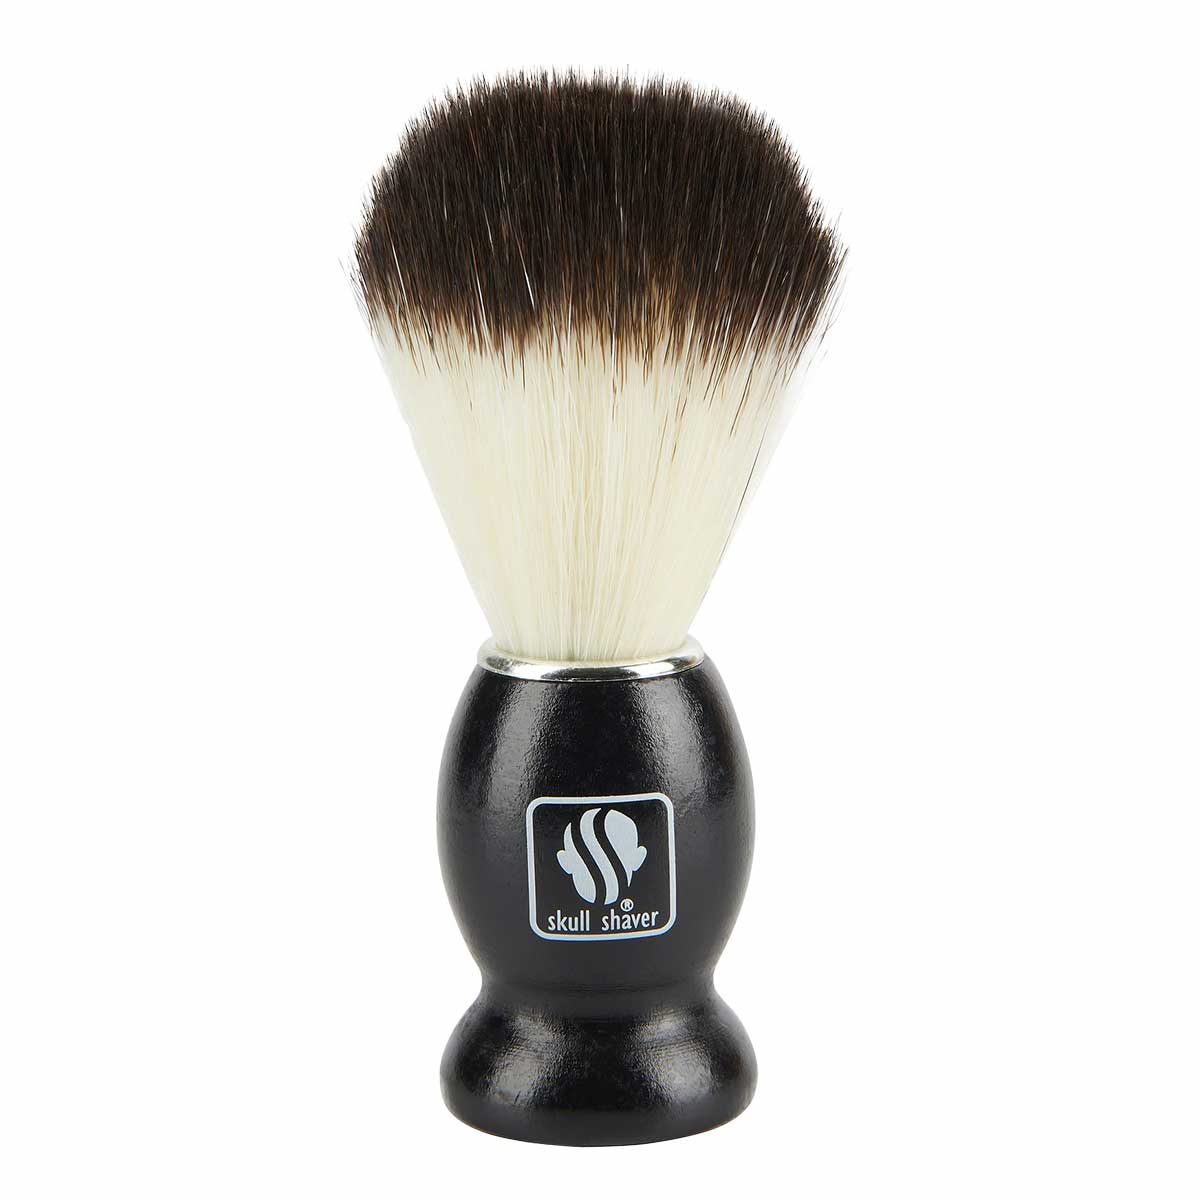 skull shaver wet shaing brush comes with a black impact resistant handle and cruelty synthetic bristles